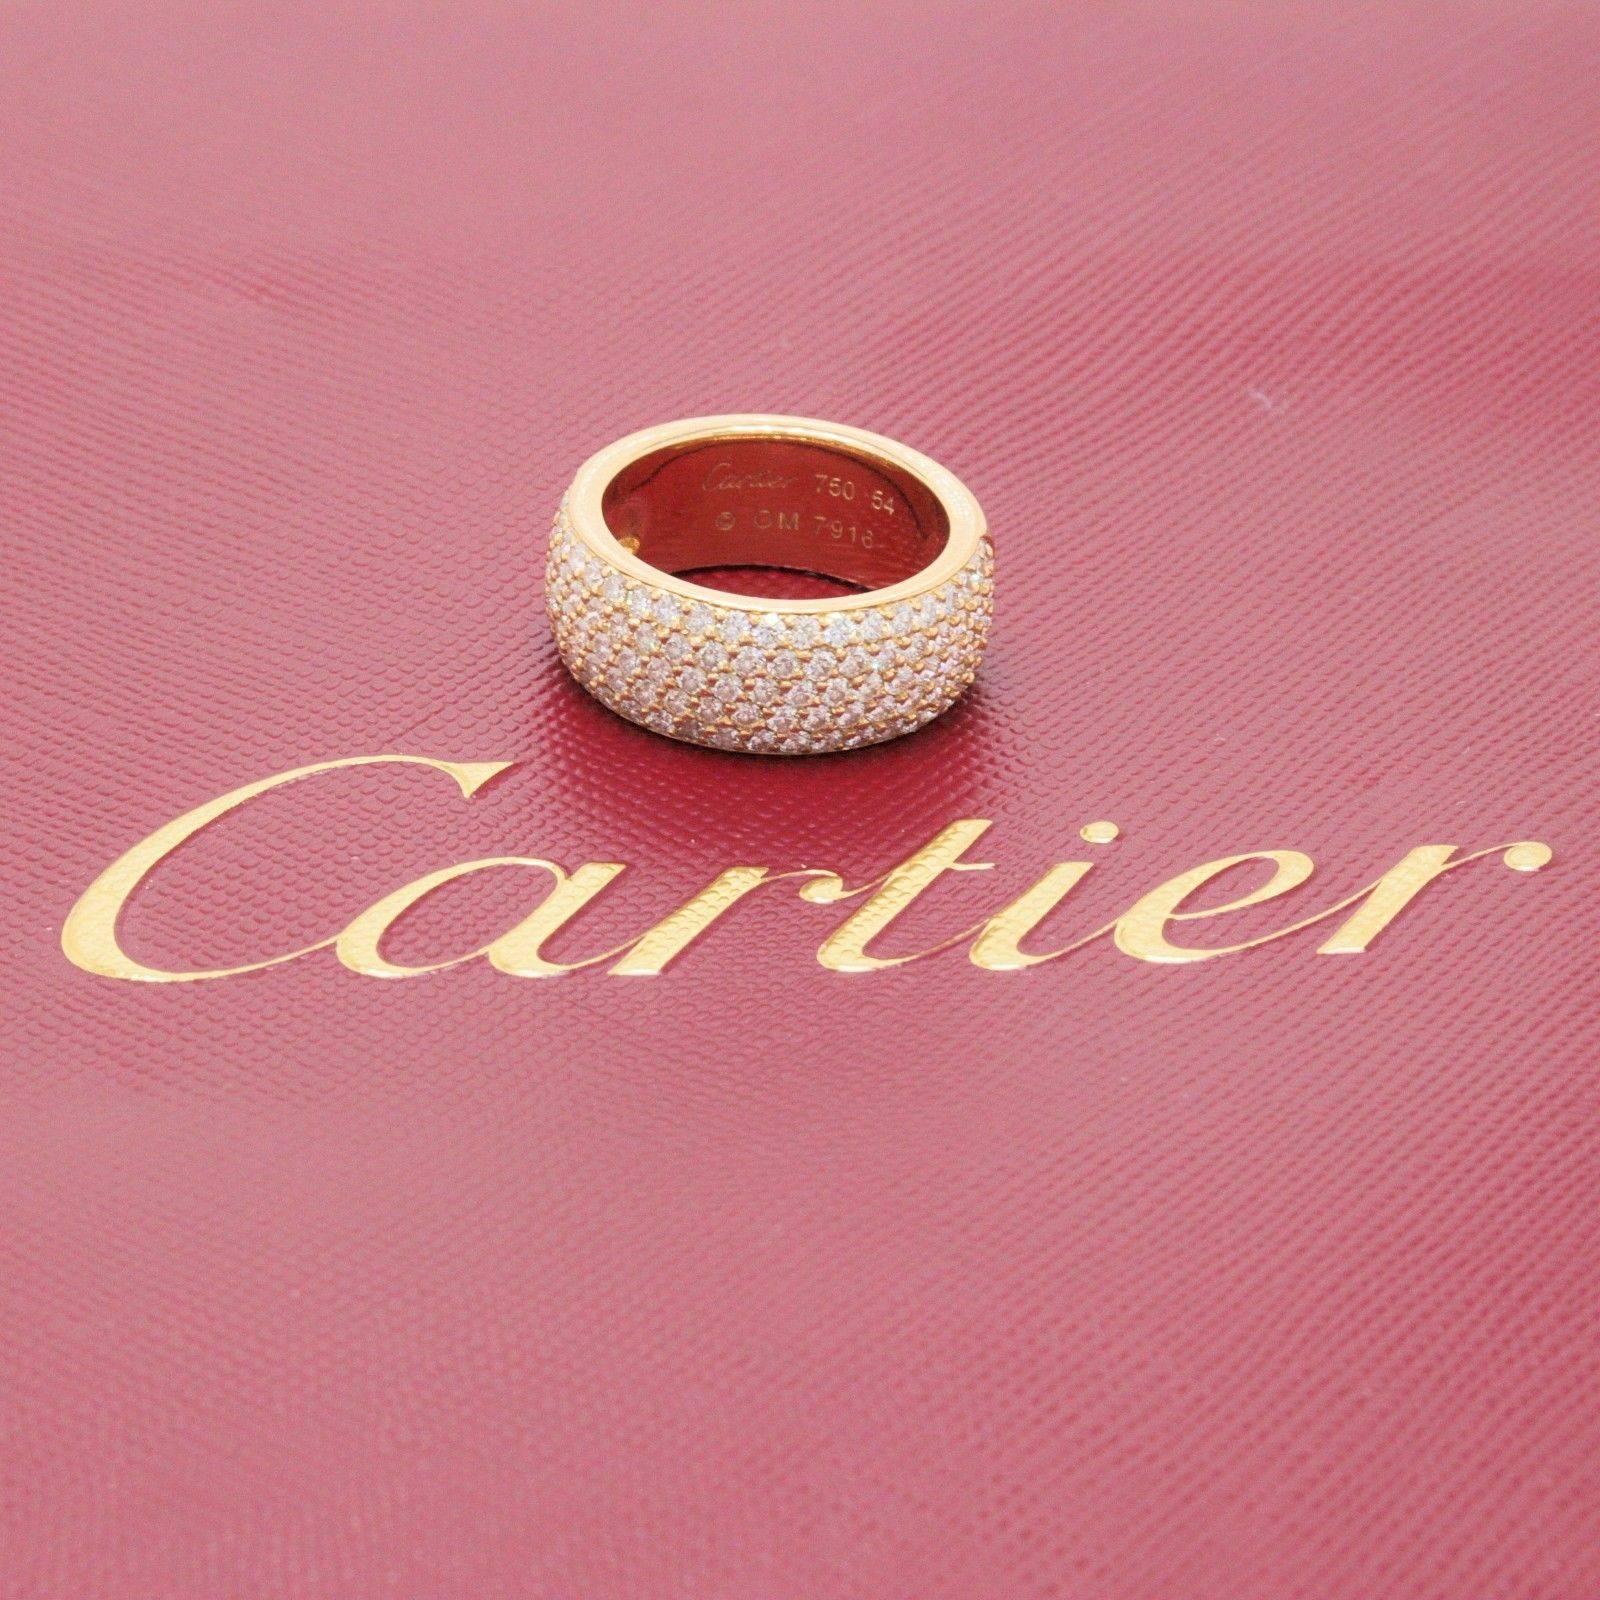 cartier pave wedding band